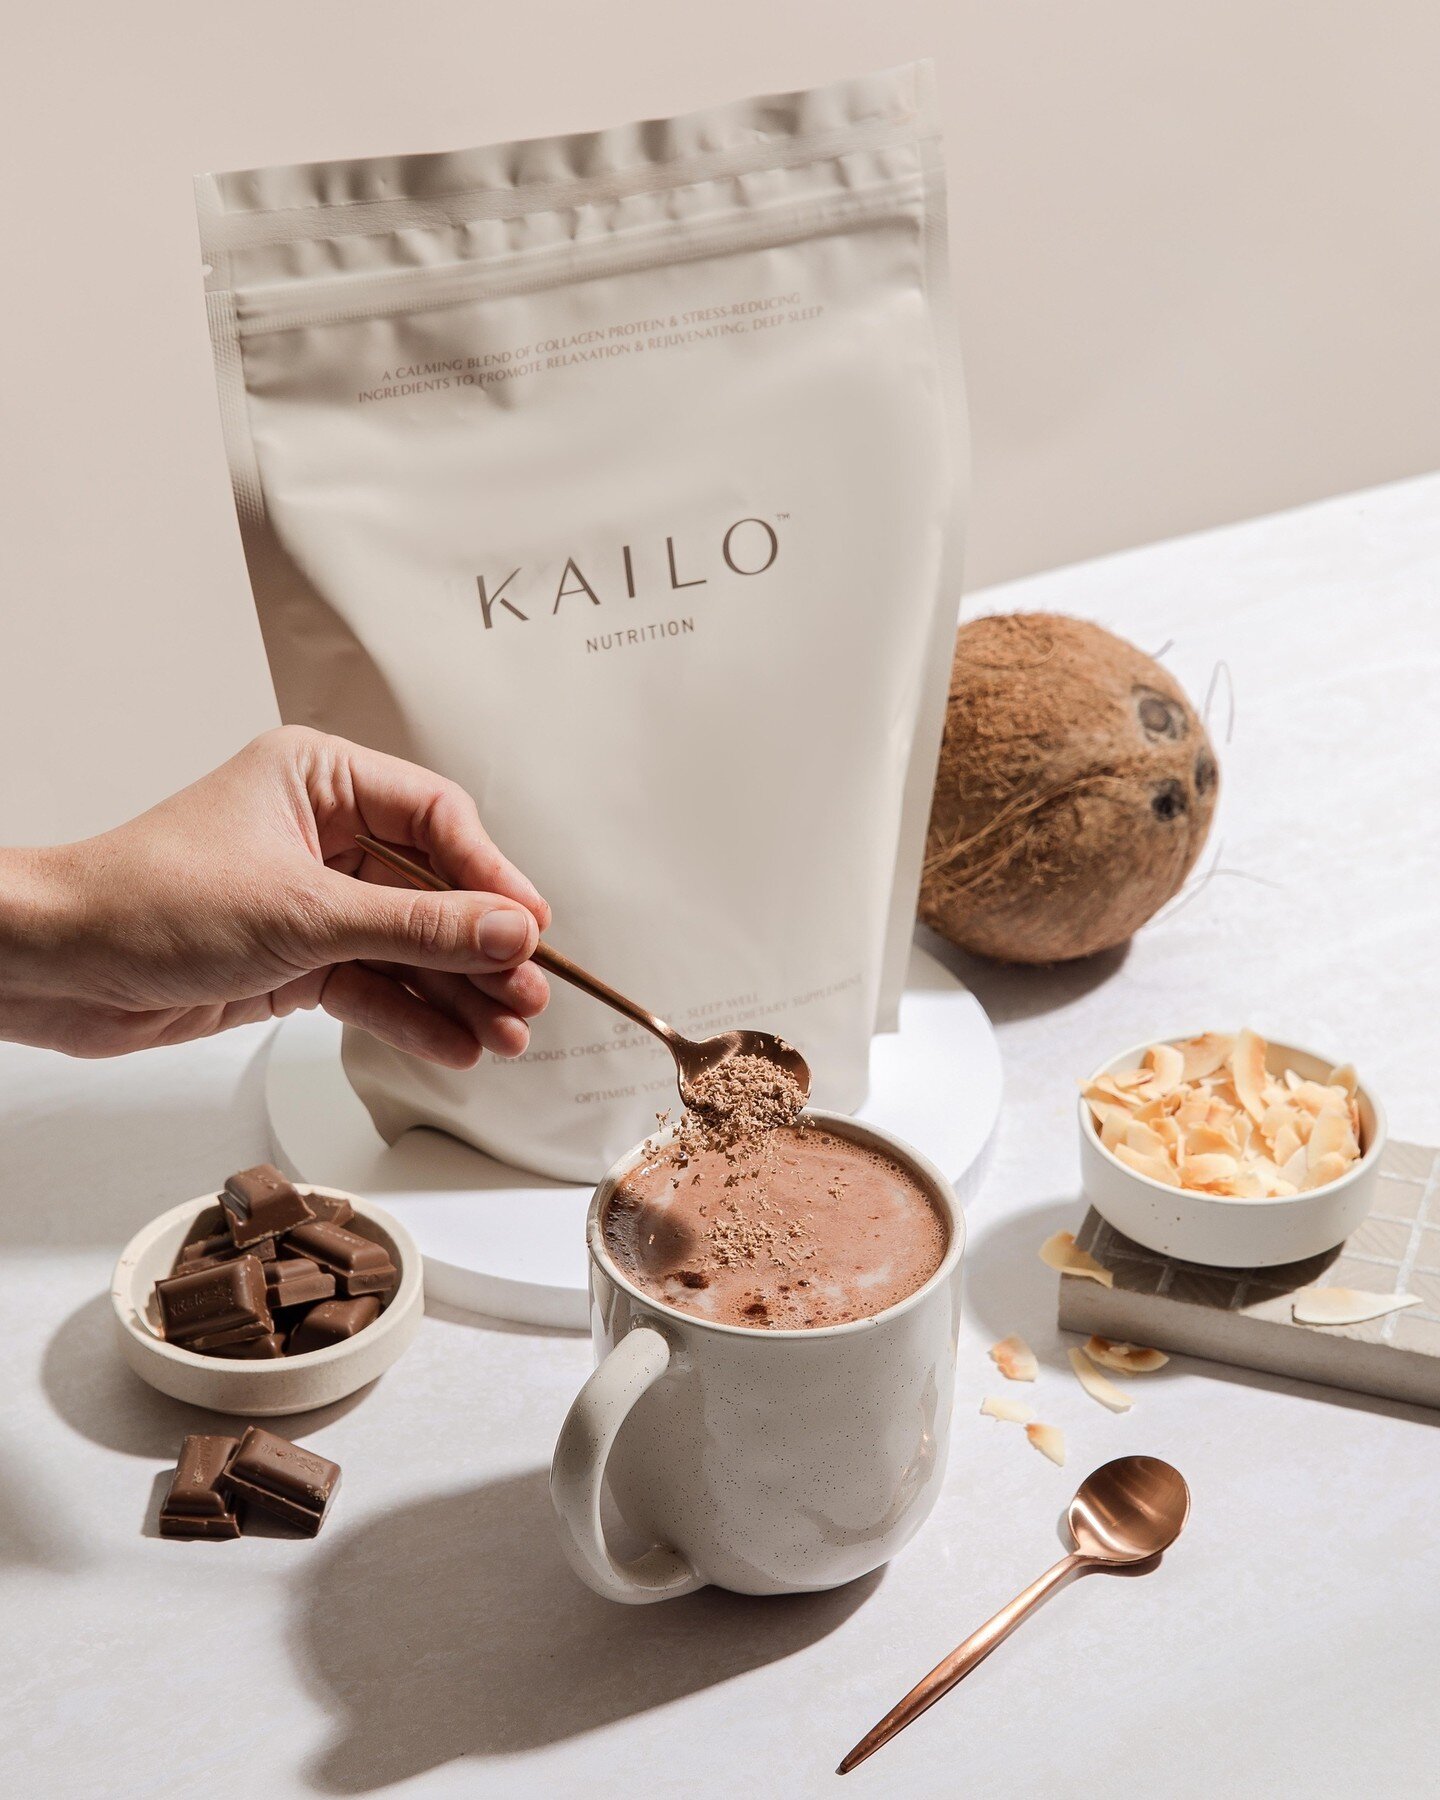 How much chocolate is too much chocolate&hellip;? 
Trick question. There is never too much chocolate 🍫 😋

Some recent work for @kailo_aus with @thecontentdivision